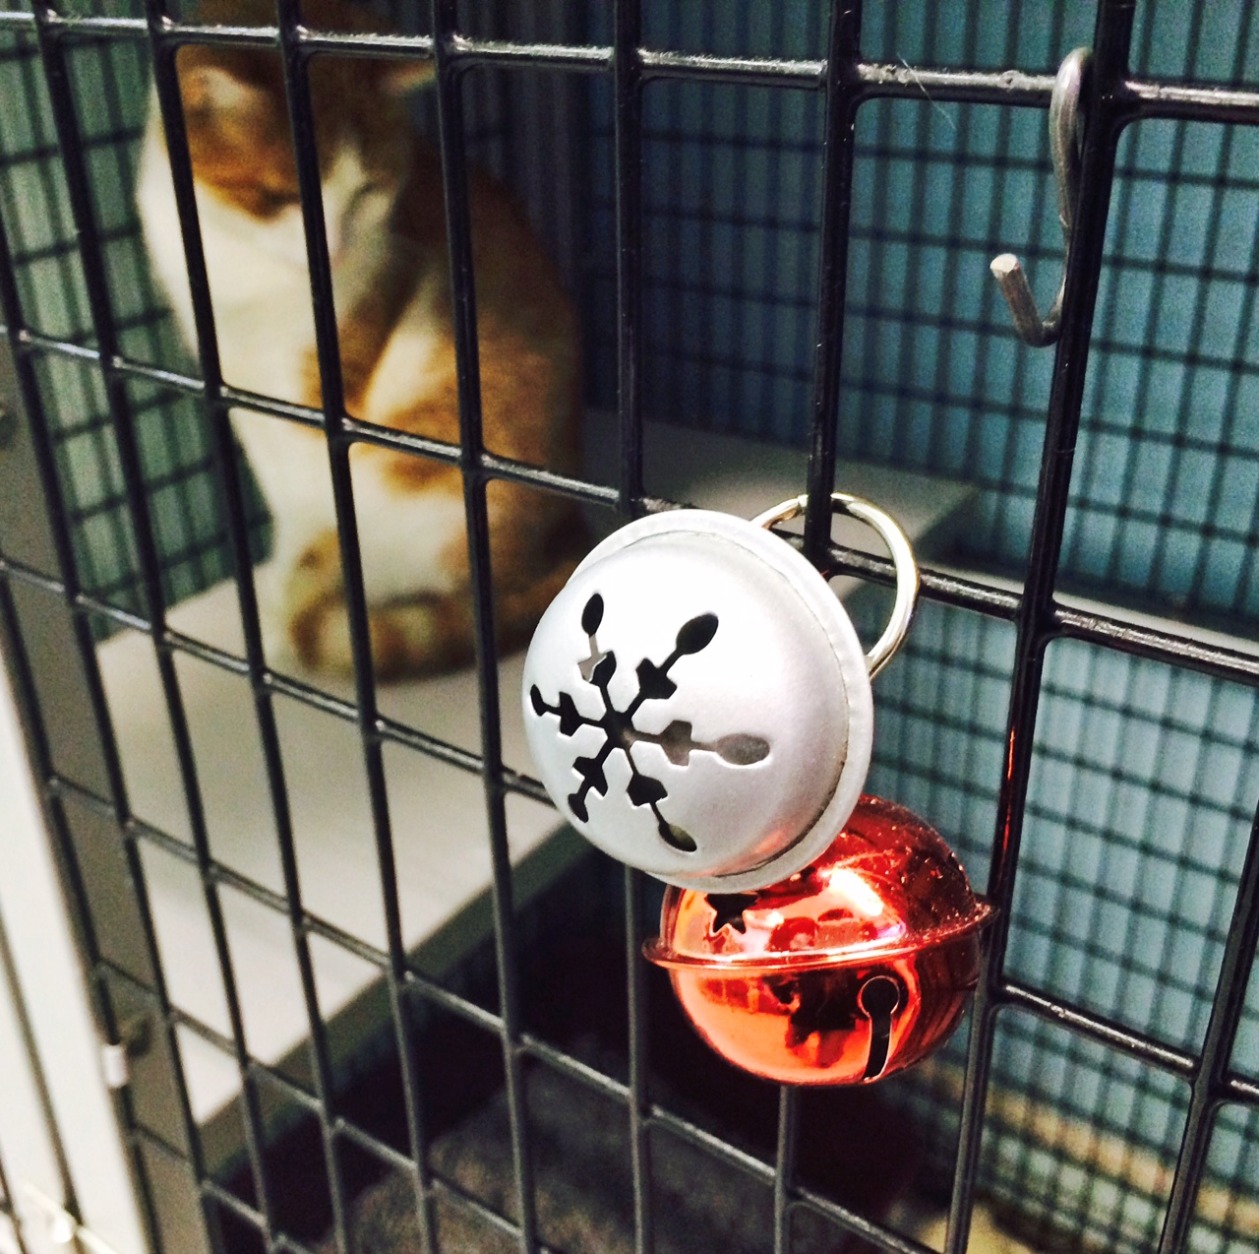 Lumiere is available for adoption at the Washington Humane Society. (WTOP/Kate Ryan)